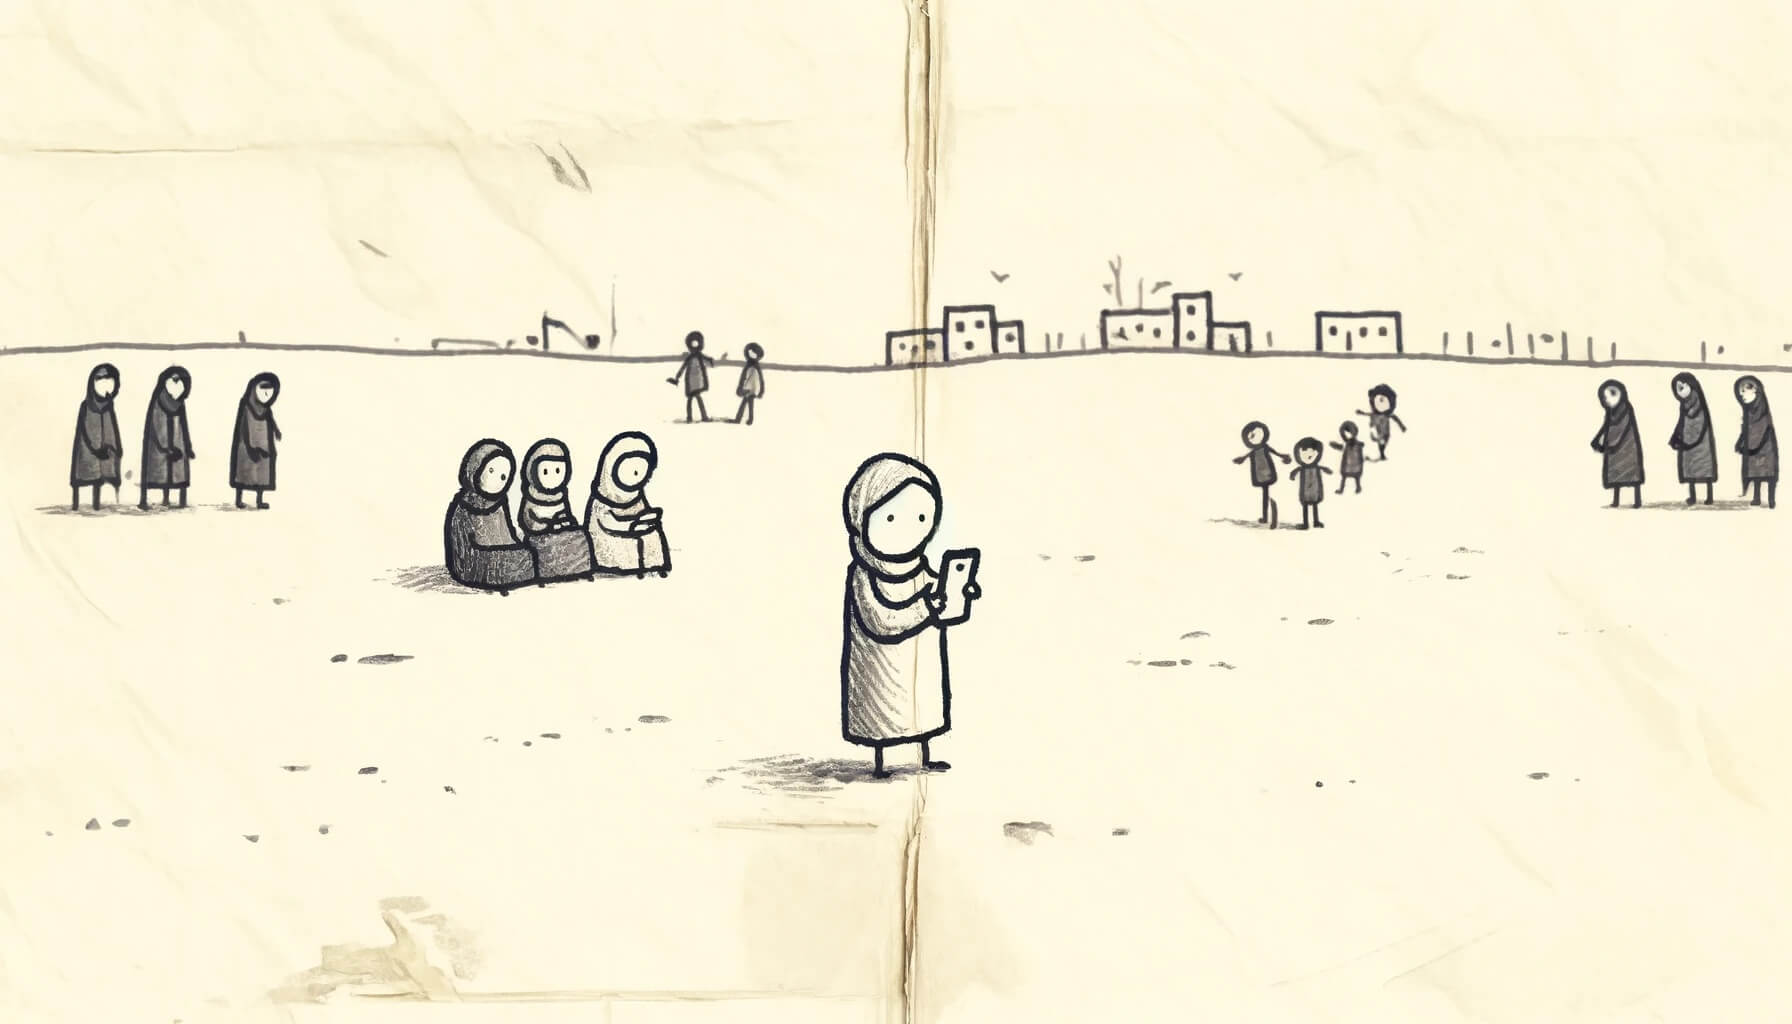 A simple, monochromatic illustration depicts a desert-like environment with sparse, small buildings in the background. Several groups of women and children are scattered across the scene. A woman in the foreground is looking at her phone. The image represents civilians in a conflict zone, showcasing how they can use technology to verify their location without revealing exact coordinates, emphasizing privacy and security through zero-knowledge proofs in zkSafeZones.